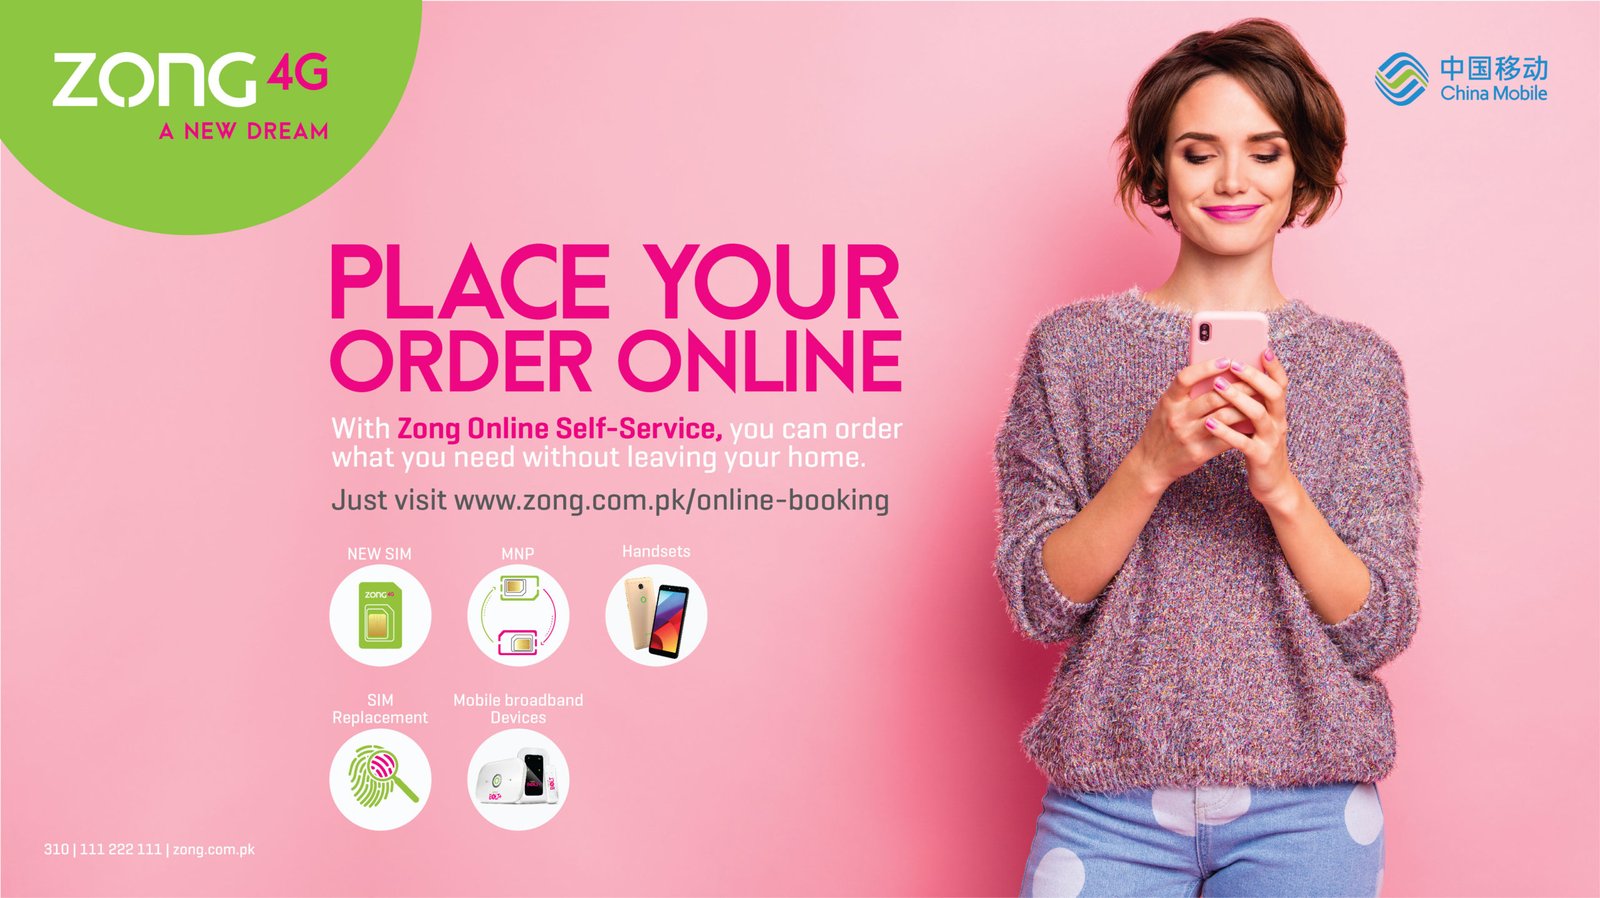 Zong 4G offers a free home delivery service to its customers